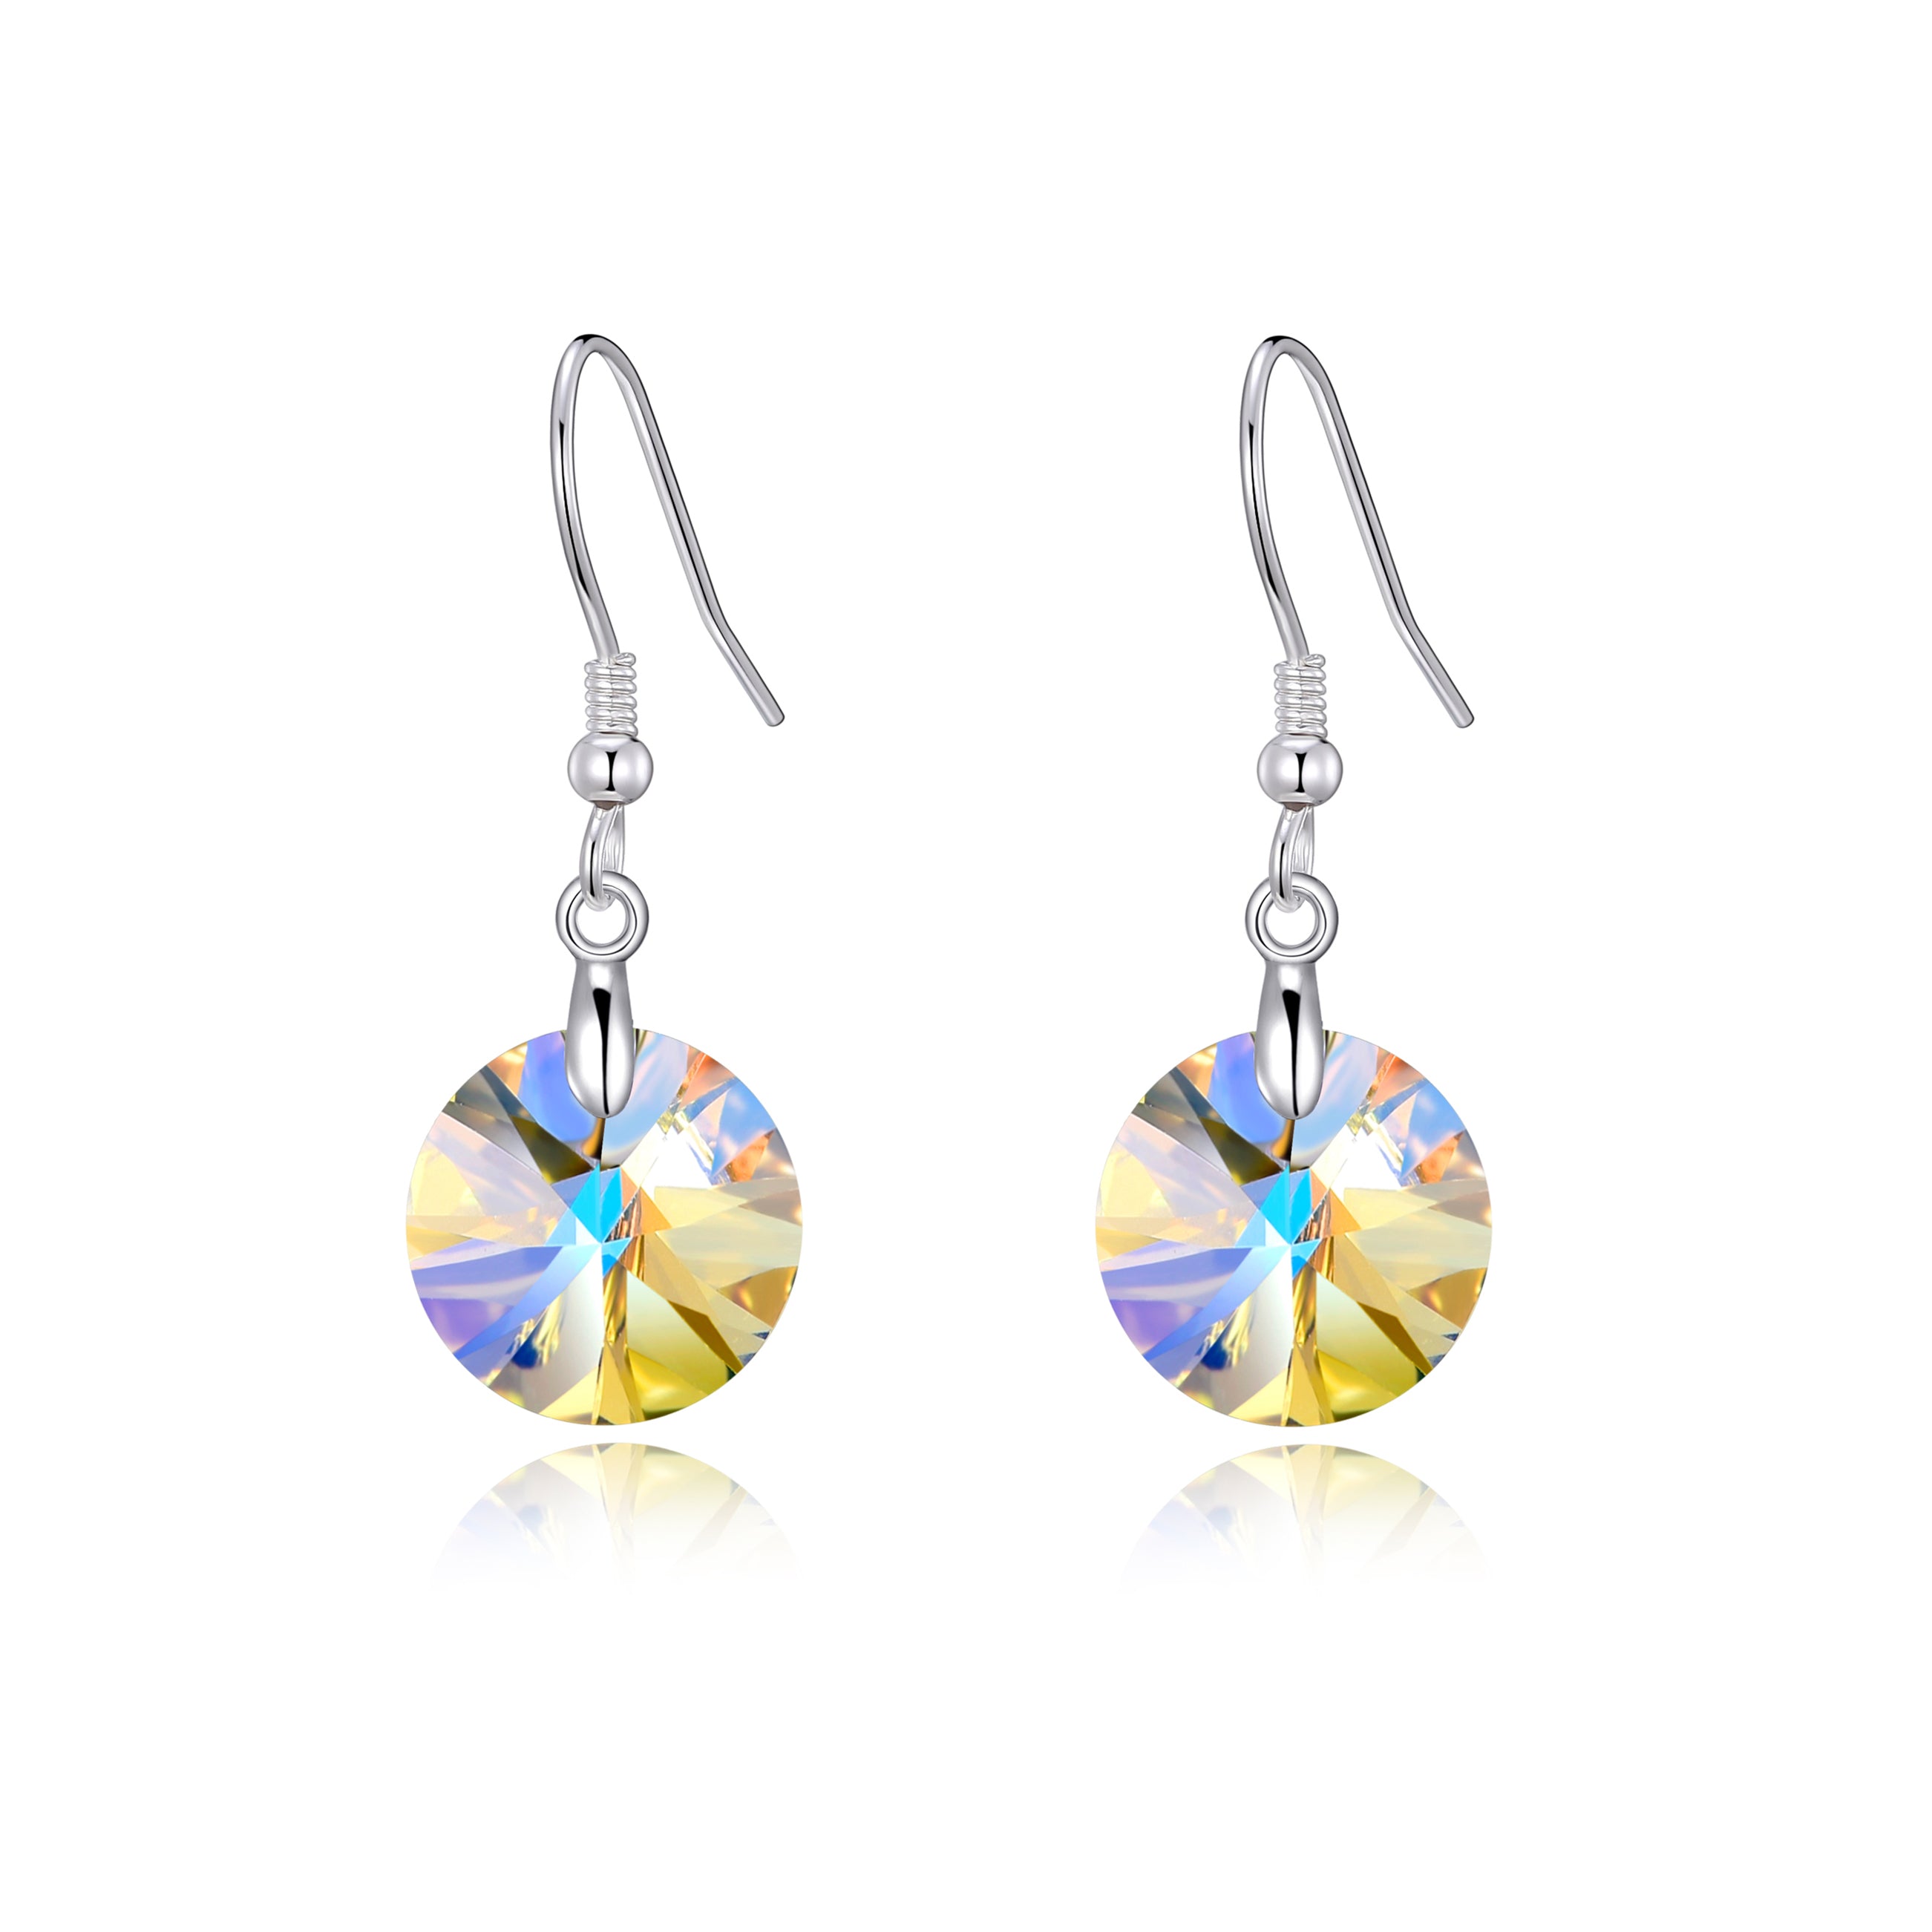 Sterling Silver Aurora Borealis Earrings Created with Zircondia® Crystals by Philip Jones Jewellery